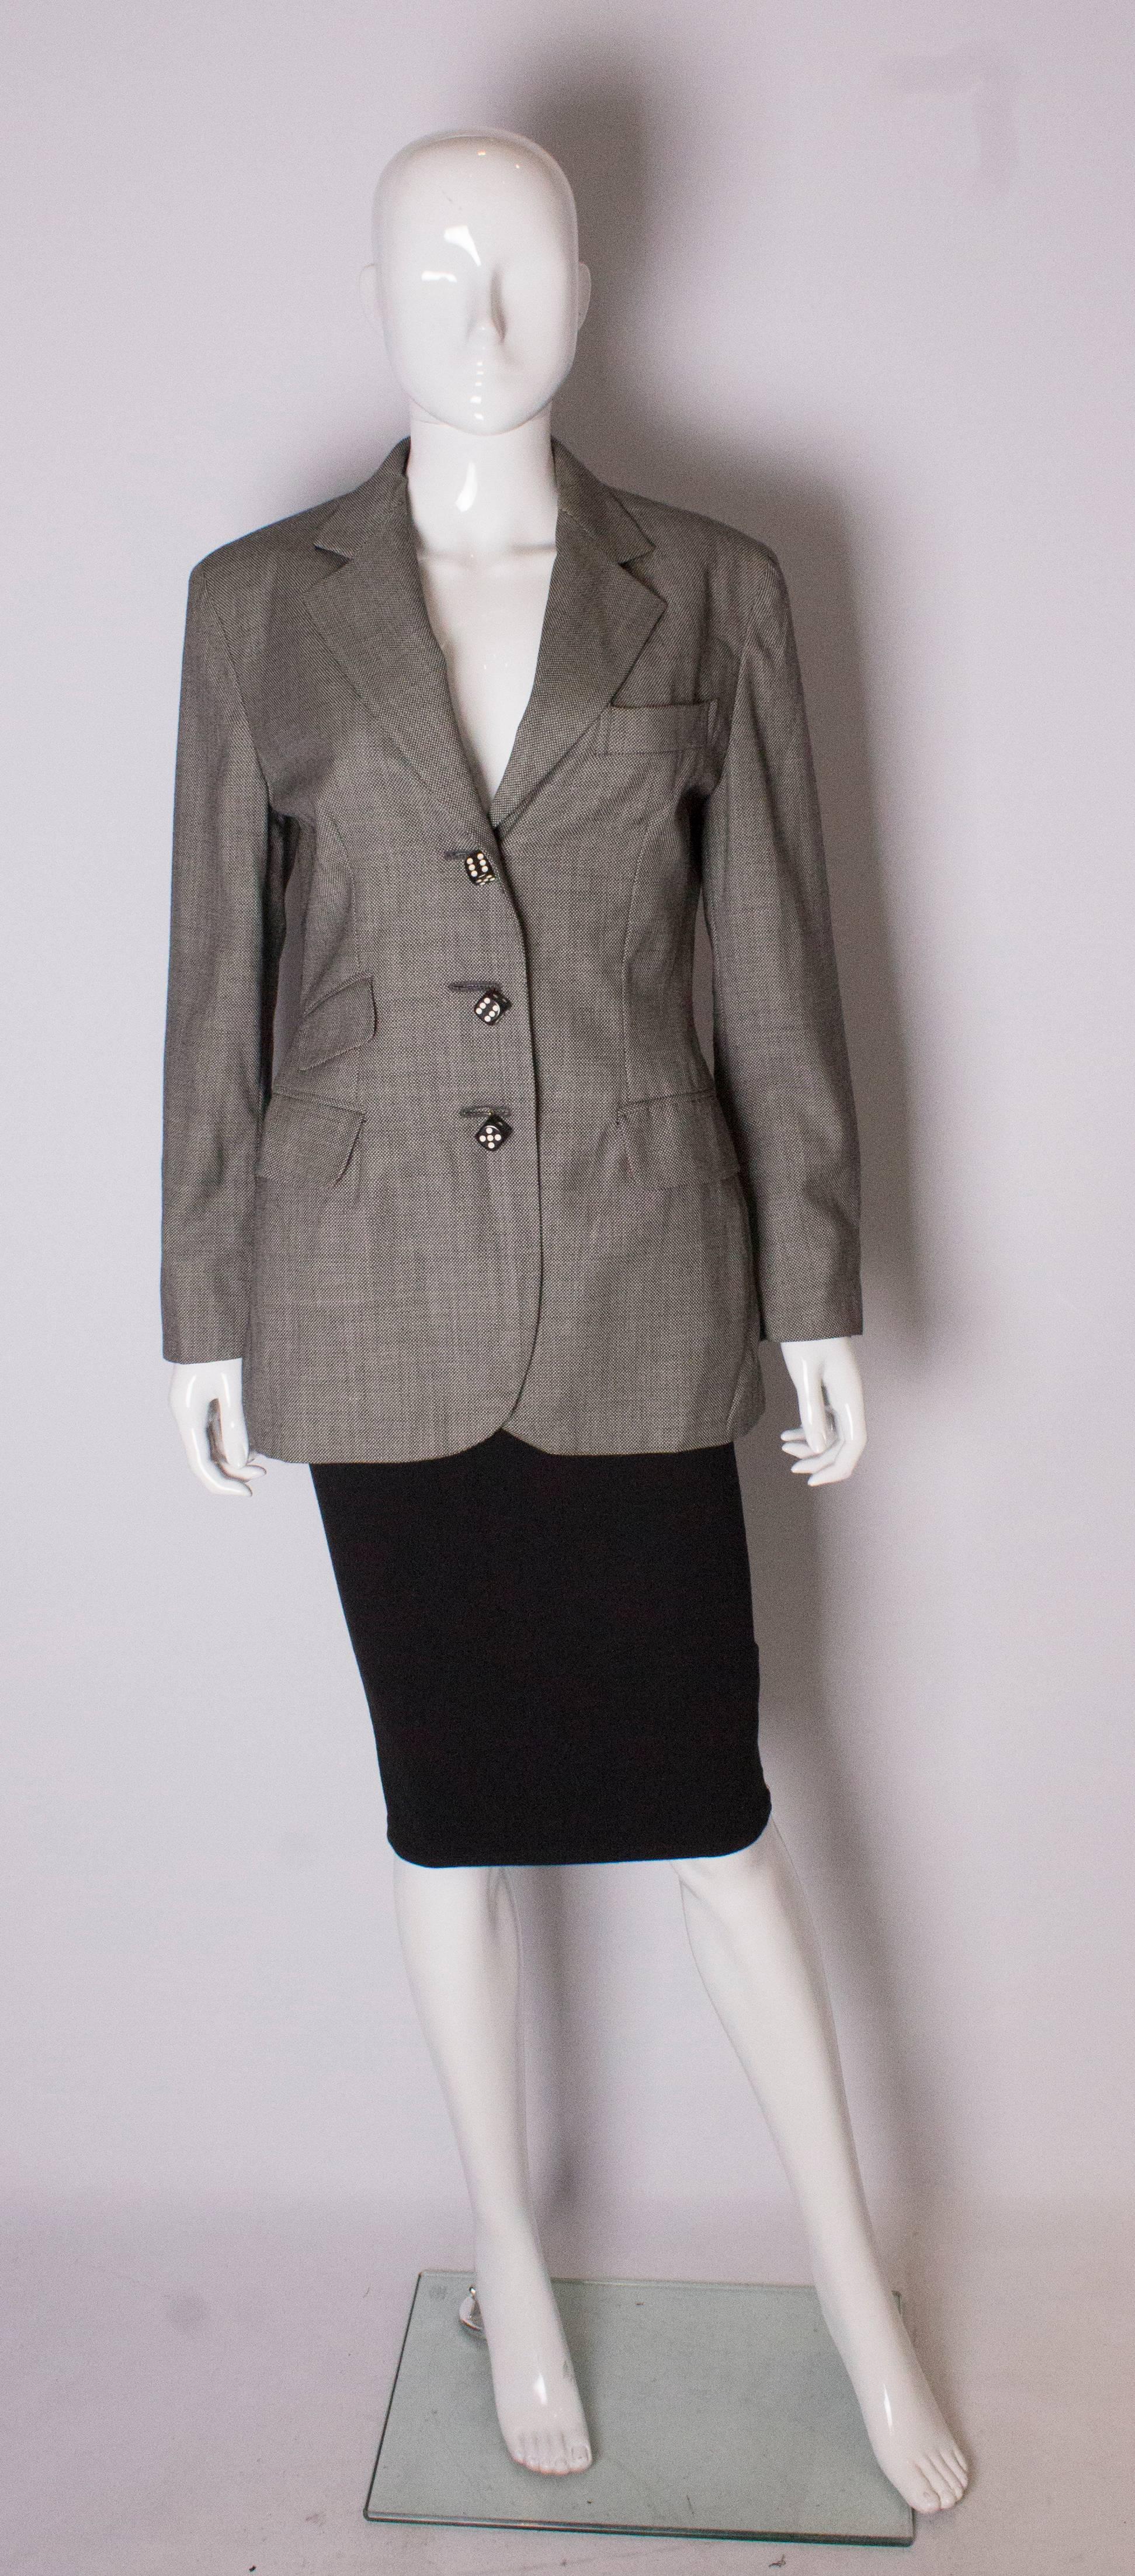 A chic jacket by Moschino Couture. The jacket is in a black and white wool fabric with a red lining. The jacket  has a pocket at breast leval on the left hand side, and two pockets on the right hand side. The jacket has three decorative dice like